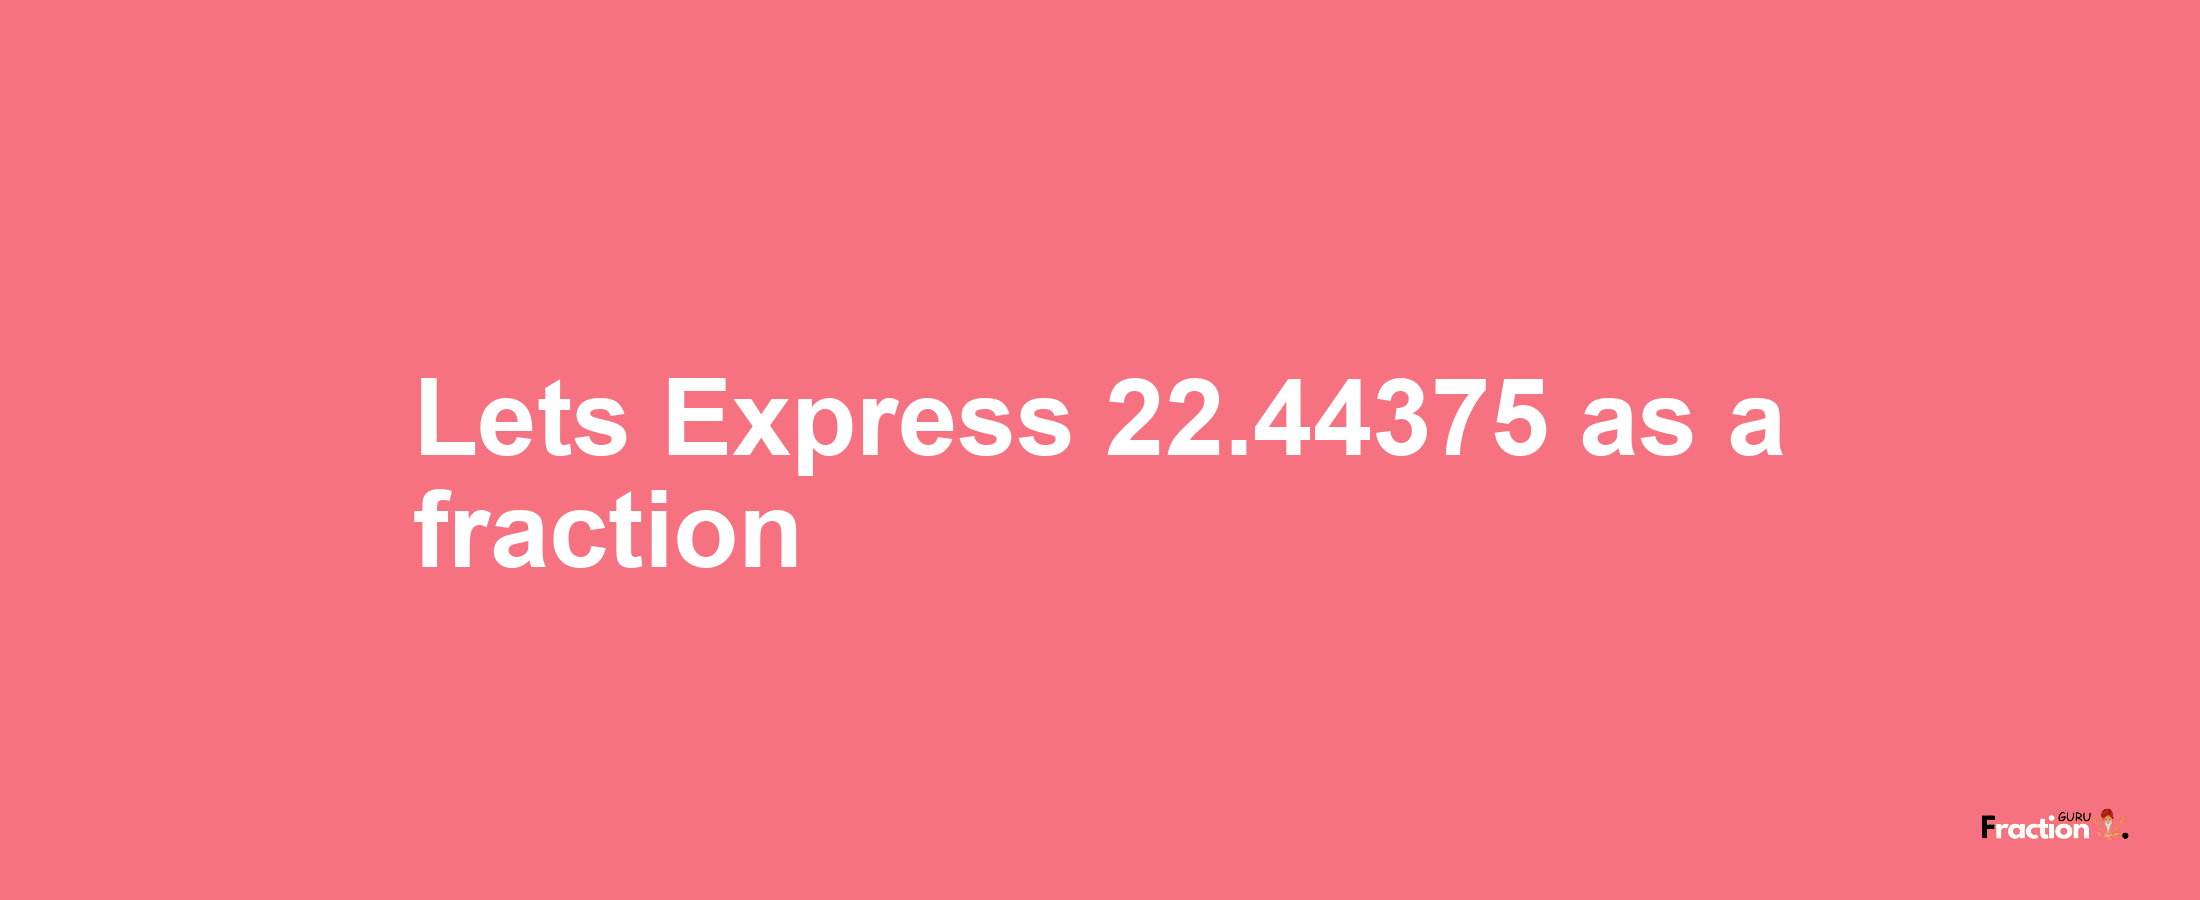 Lets Express 22.44375 as afraction